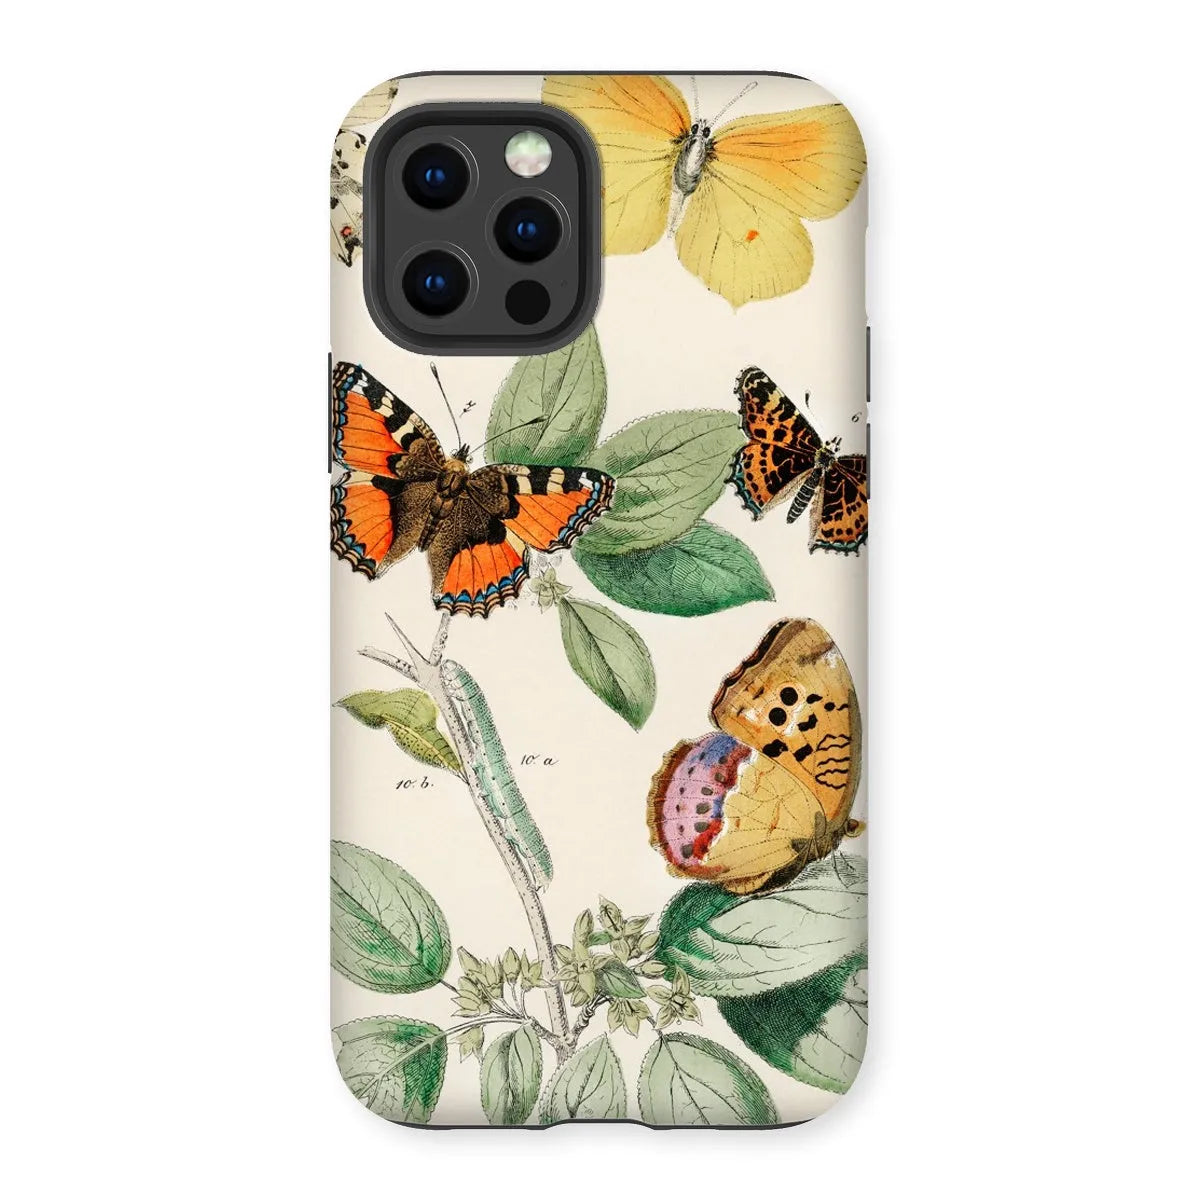 Butterfly Aesthetic Art Phone Case - William Forsell Kirby - Iphone 12 Pro / Matte - Mobile Phone Cases - Aesthetic Art